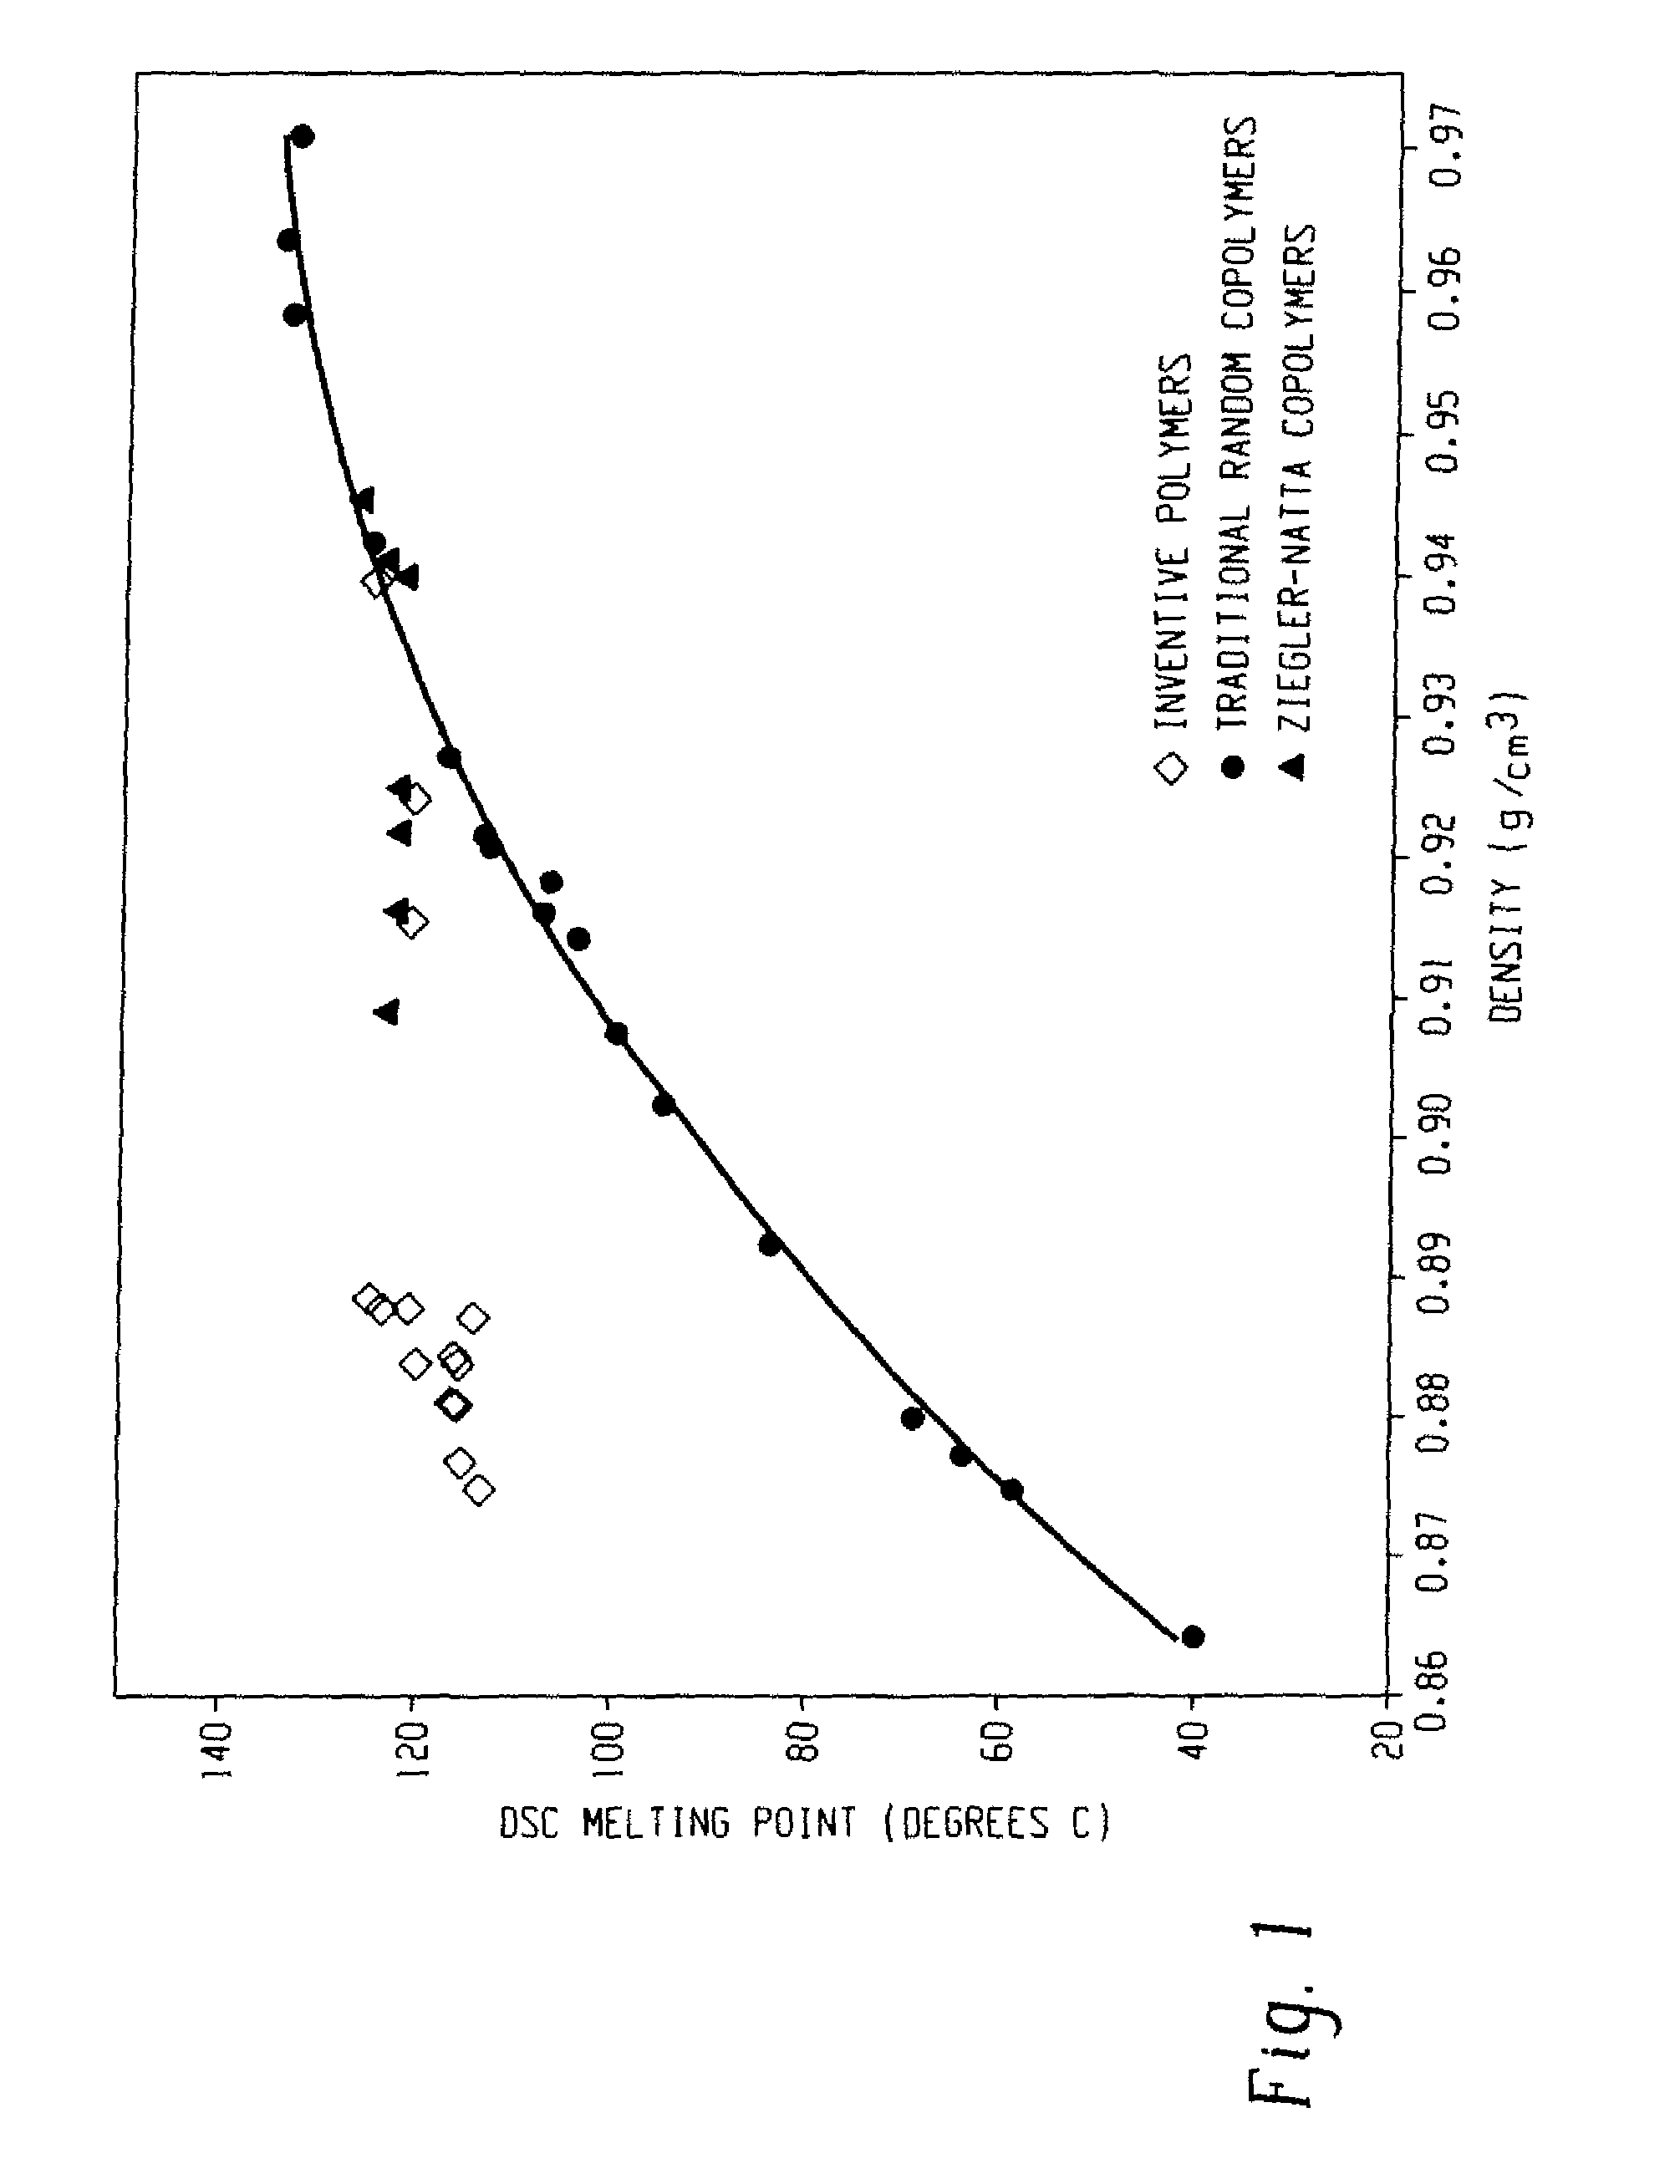 Polyolefin compositions and articles prepared therefrom, and methods for making the same